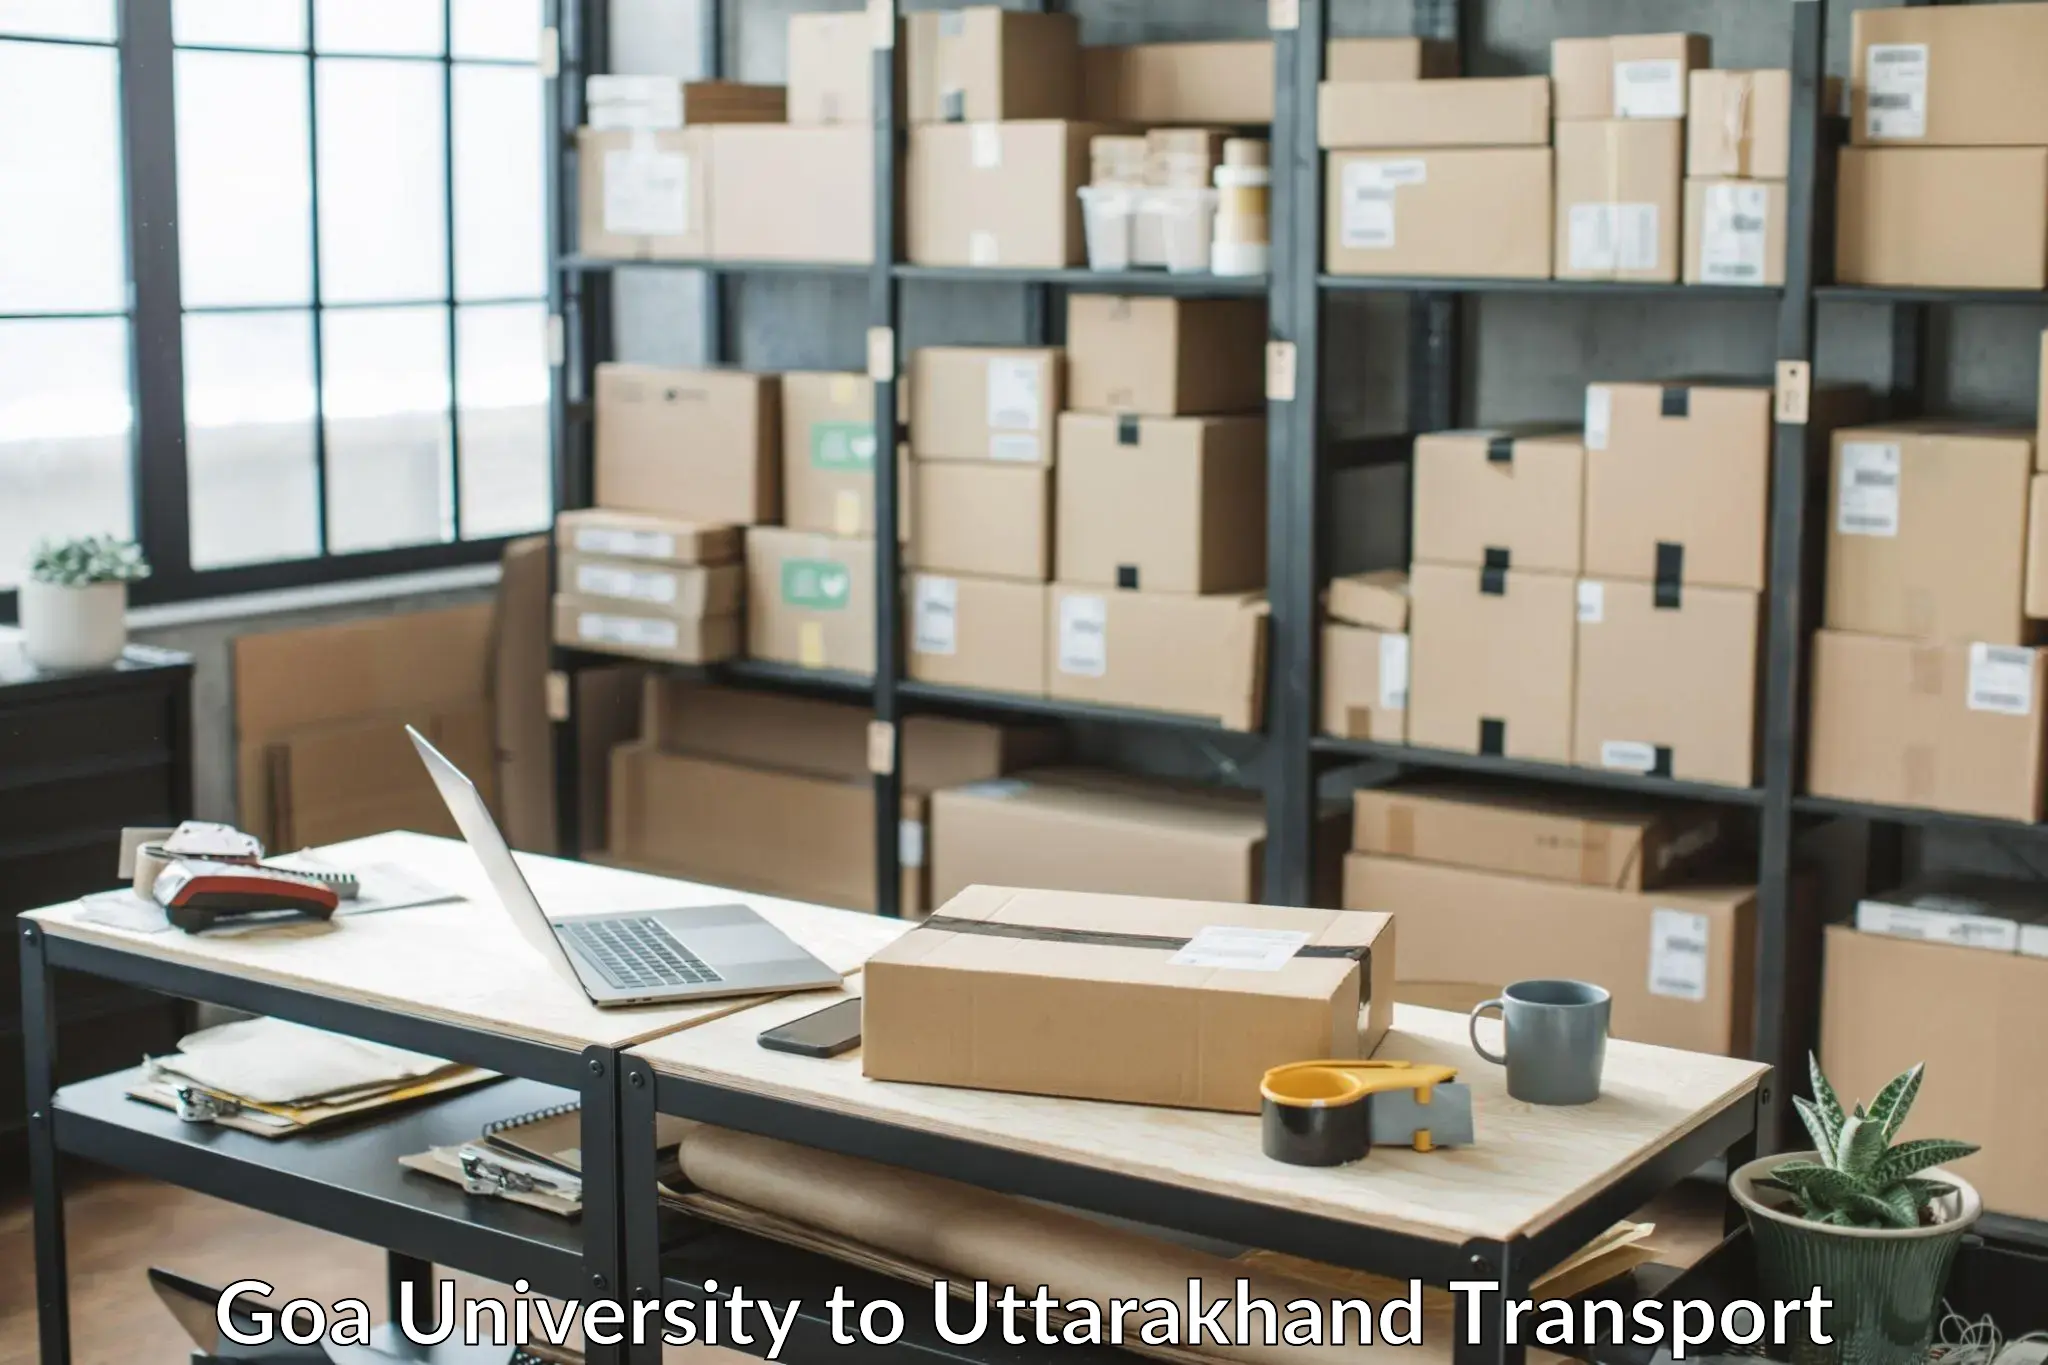 Package delivery services Goa University to Mussoorie